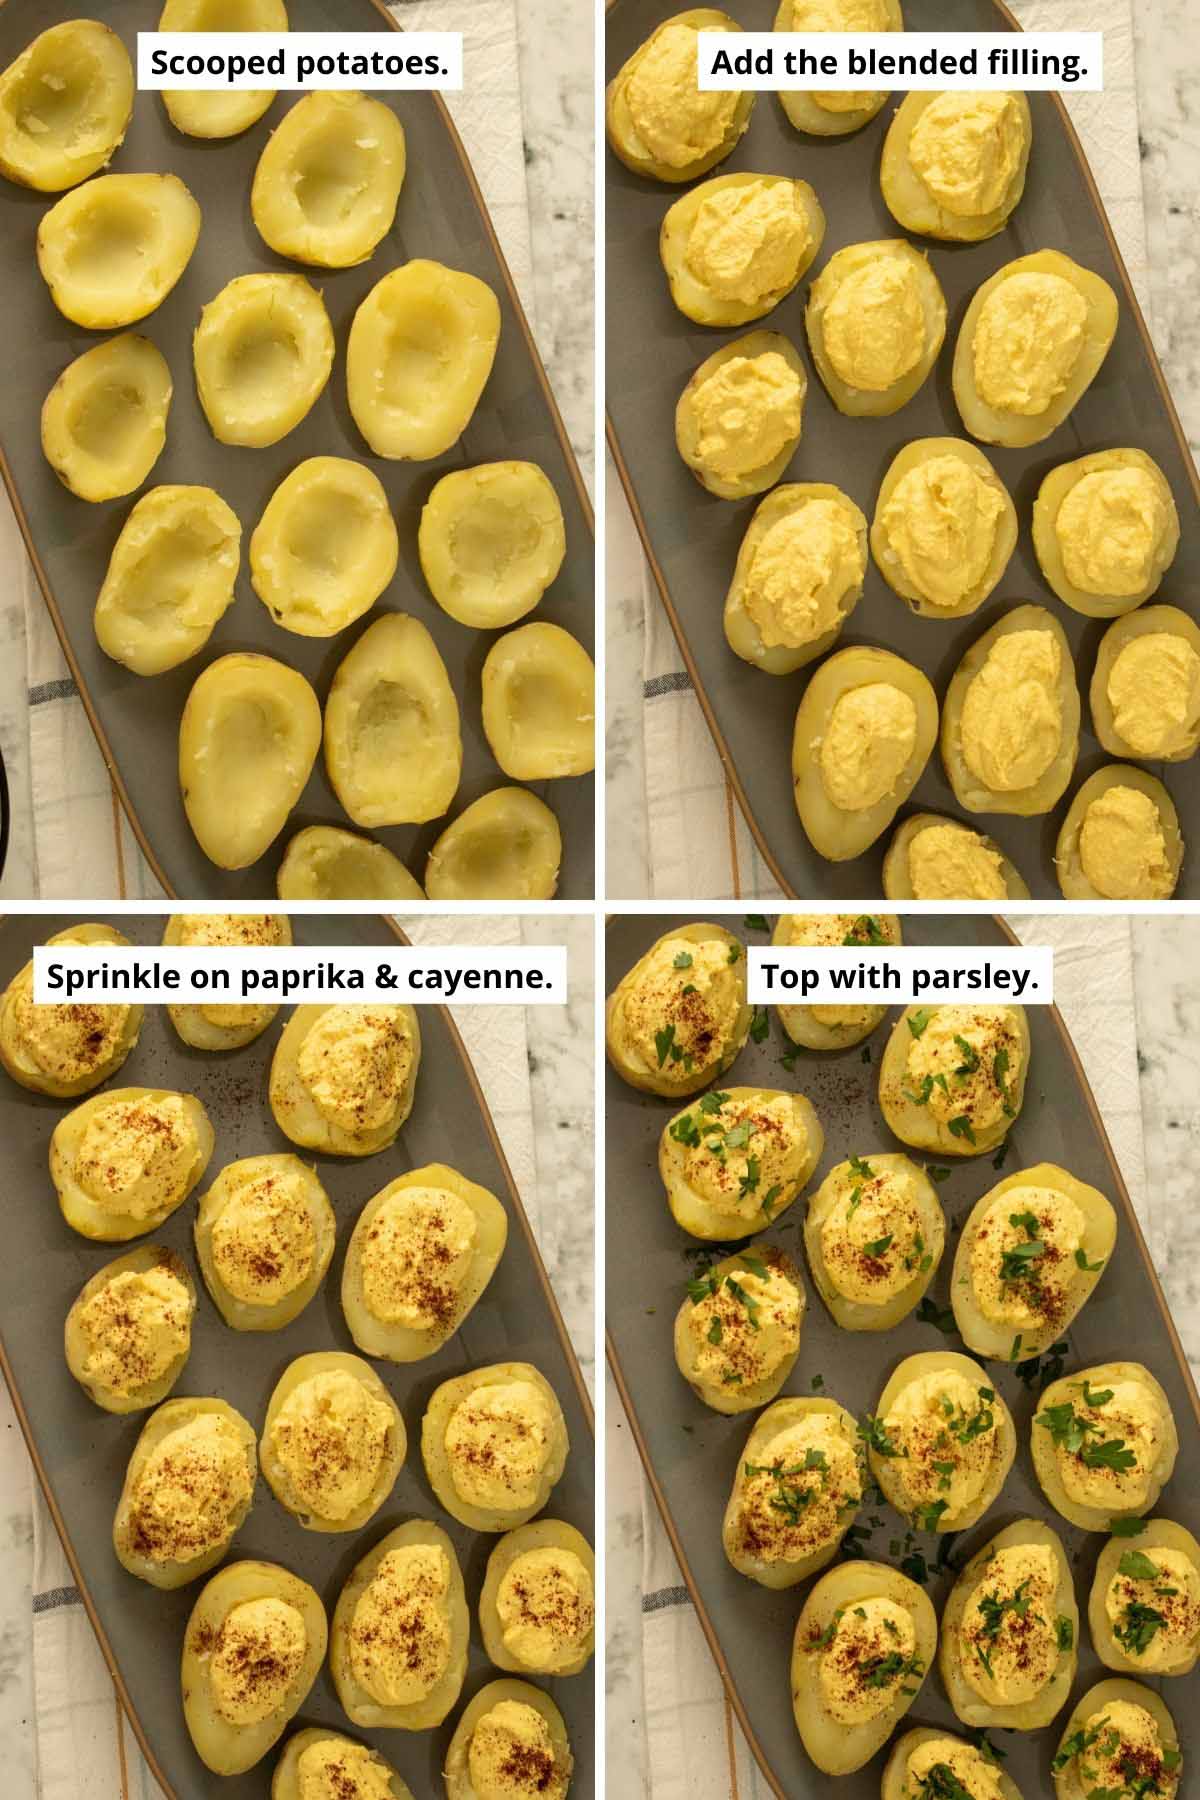 image collage showing the empty scooped potatoes, with the filling added, with the paprika, and with the parsley